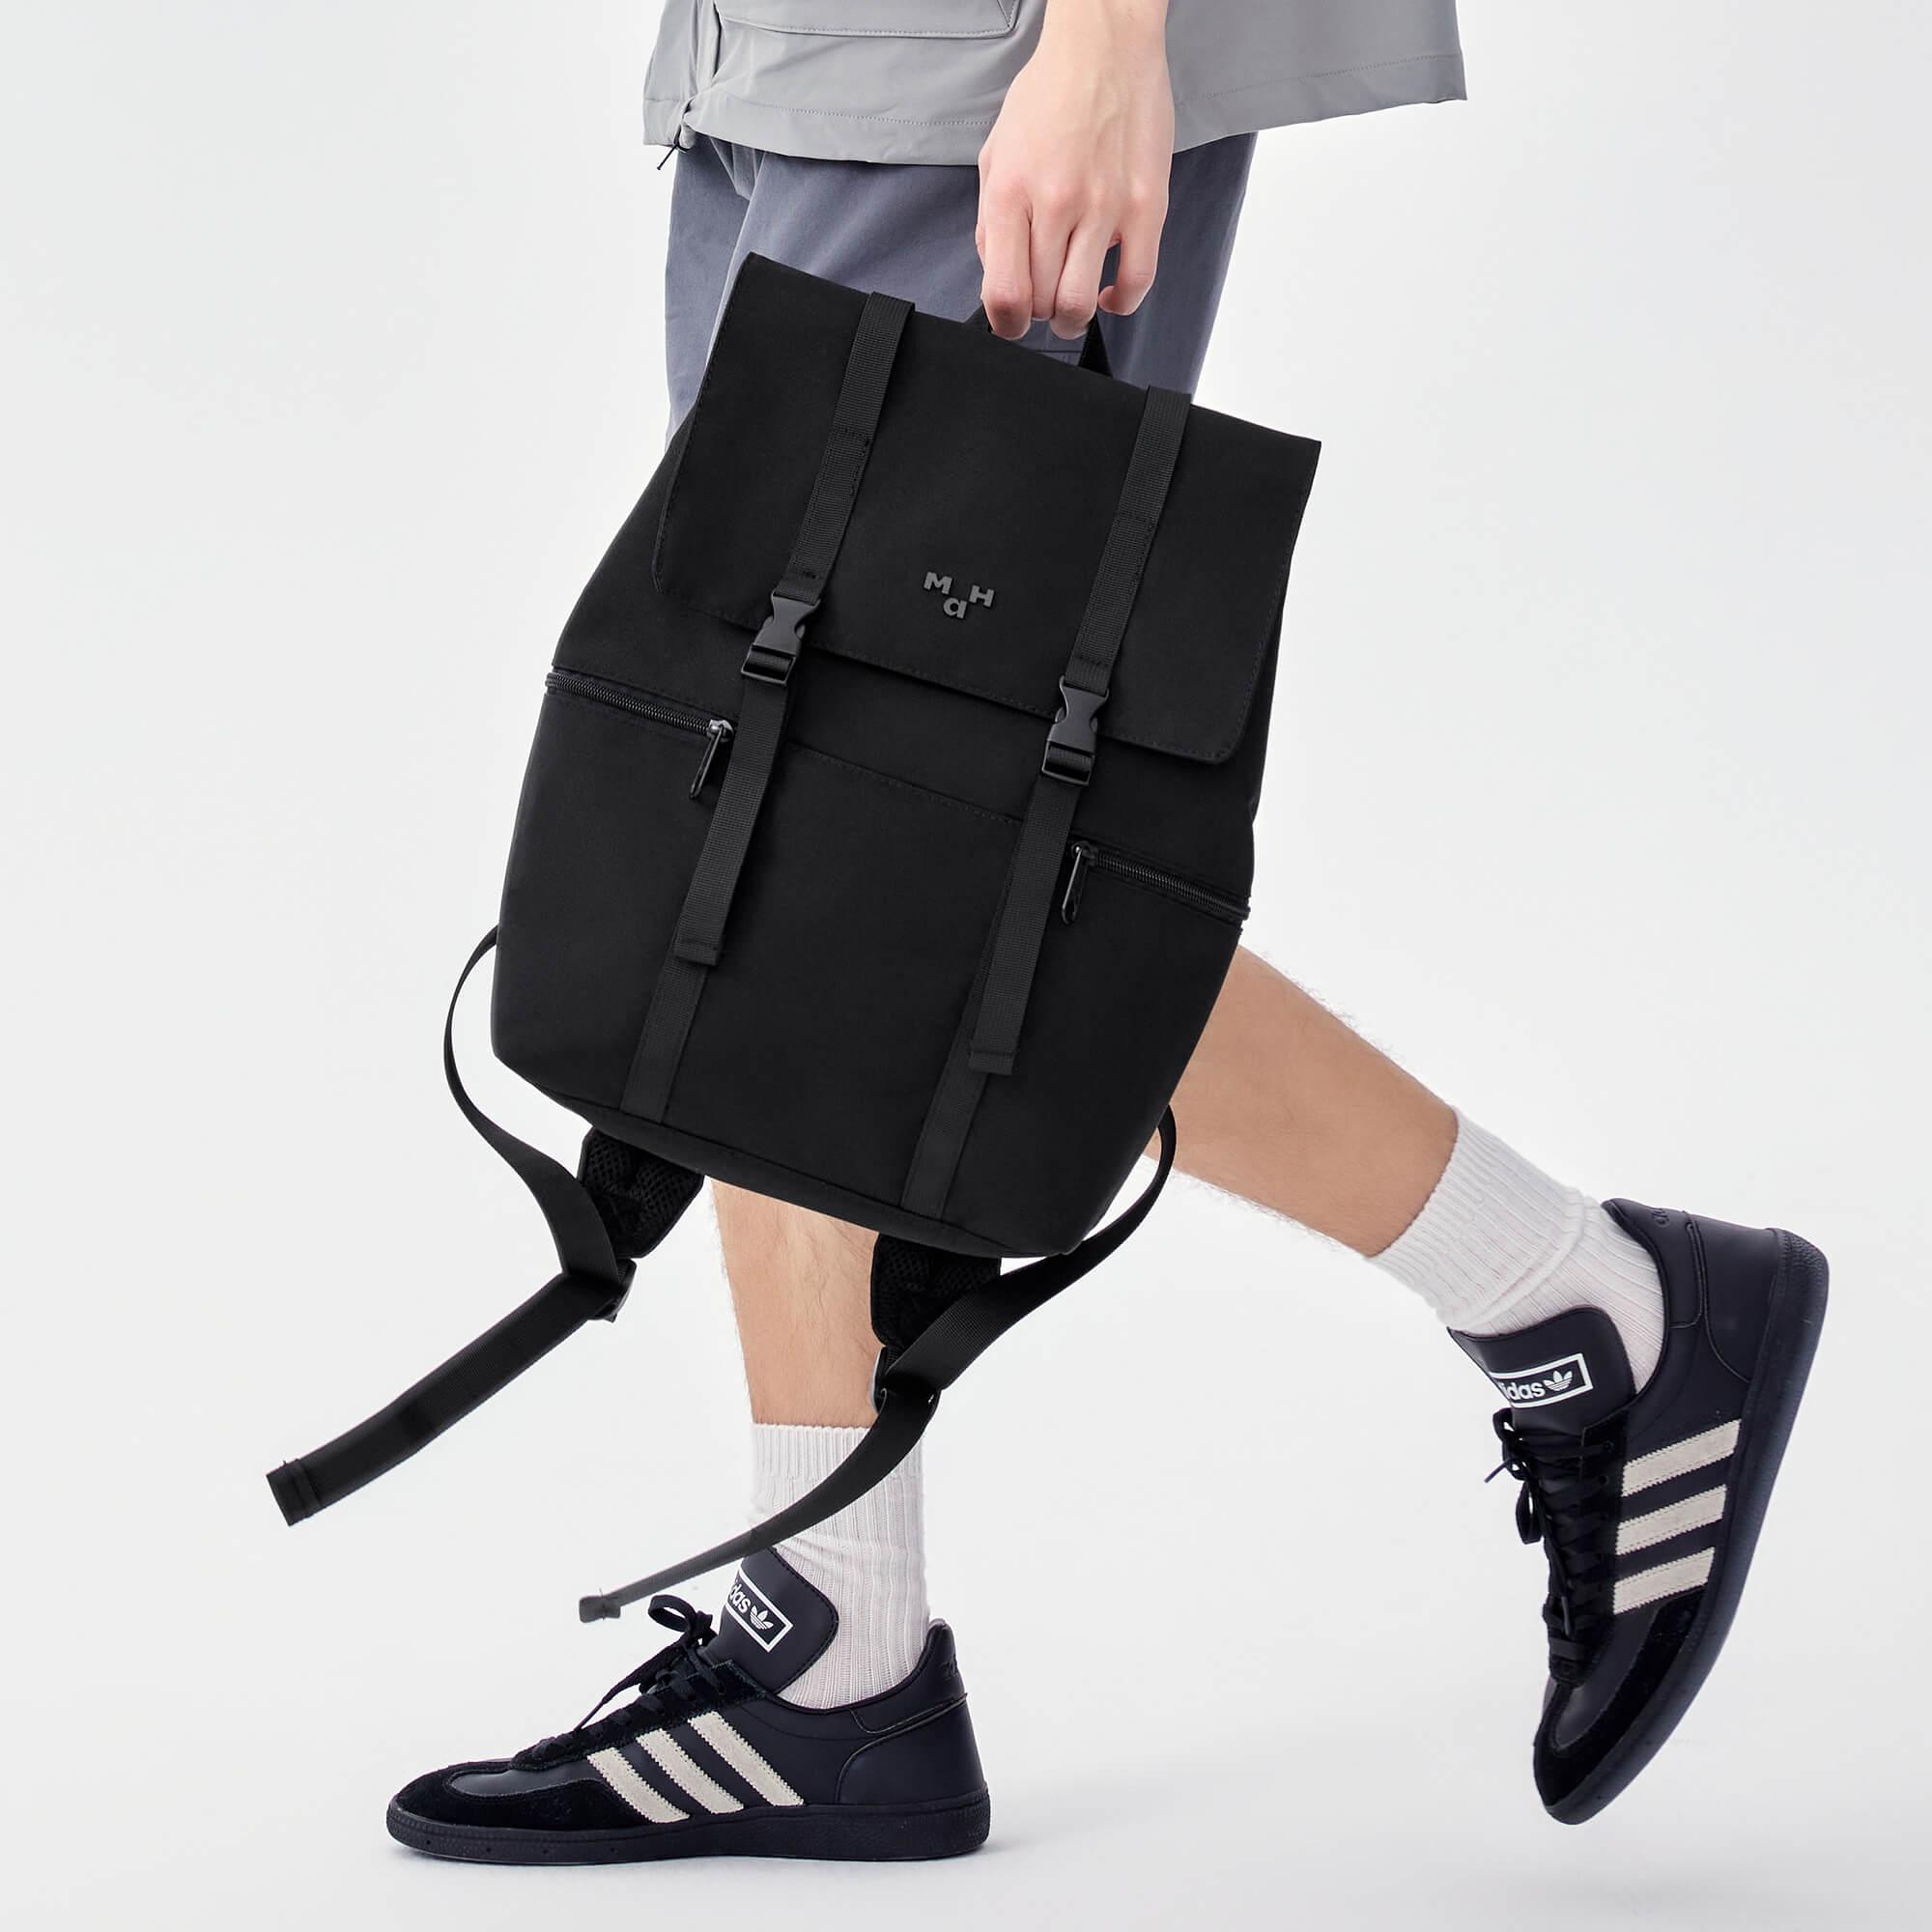 Backpack With Laptop Compartment 